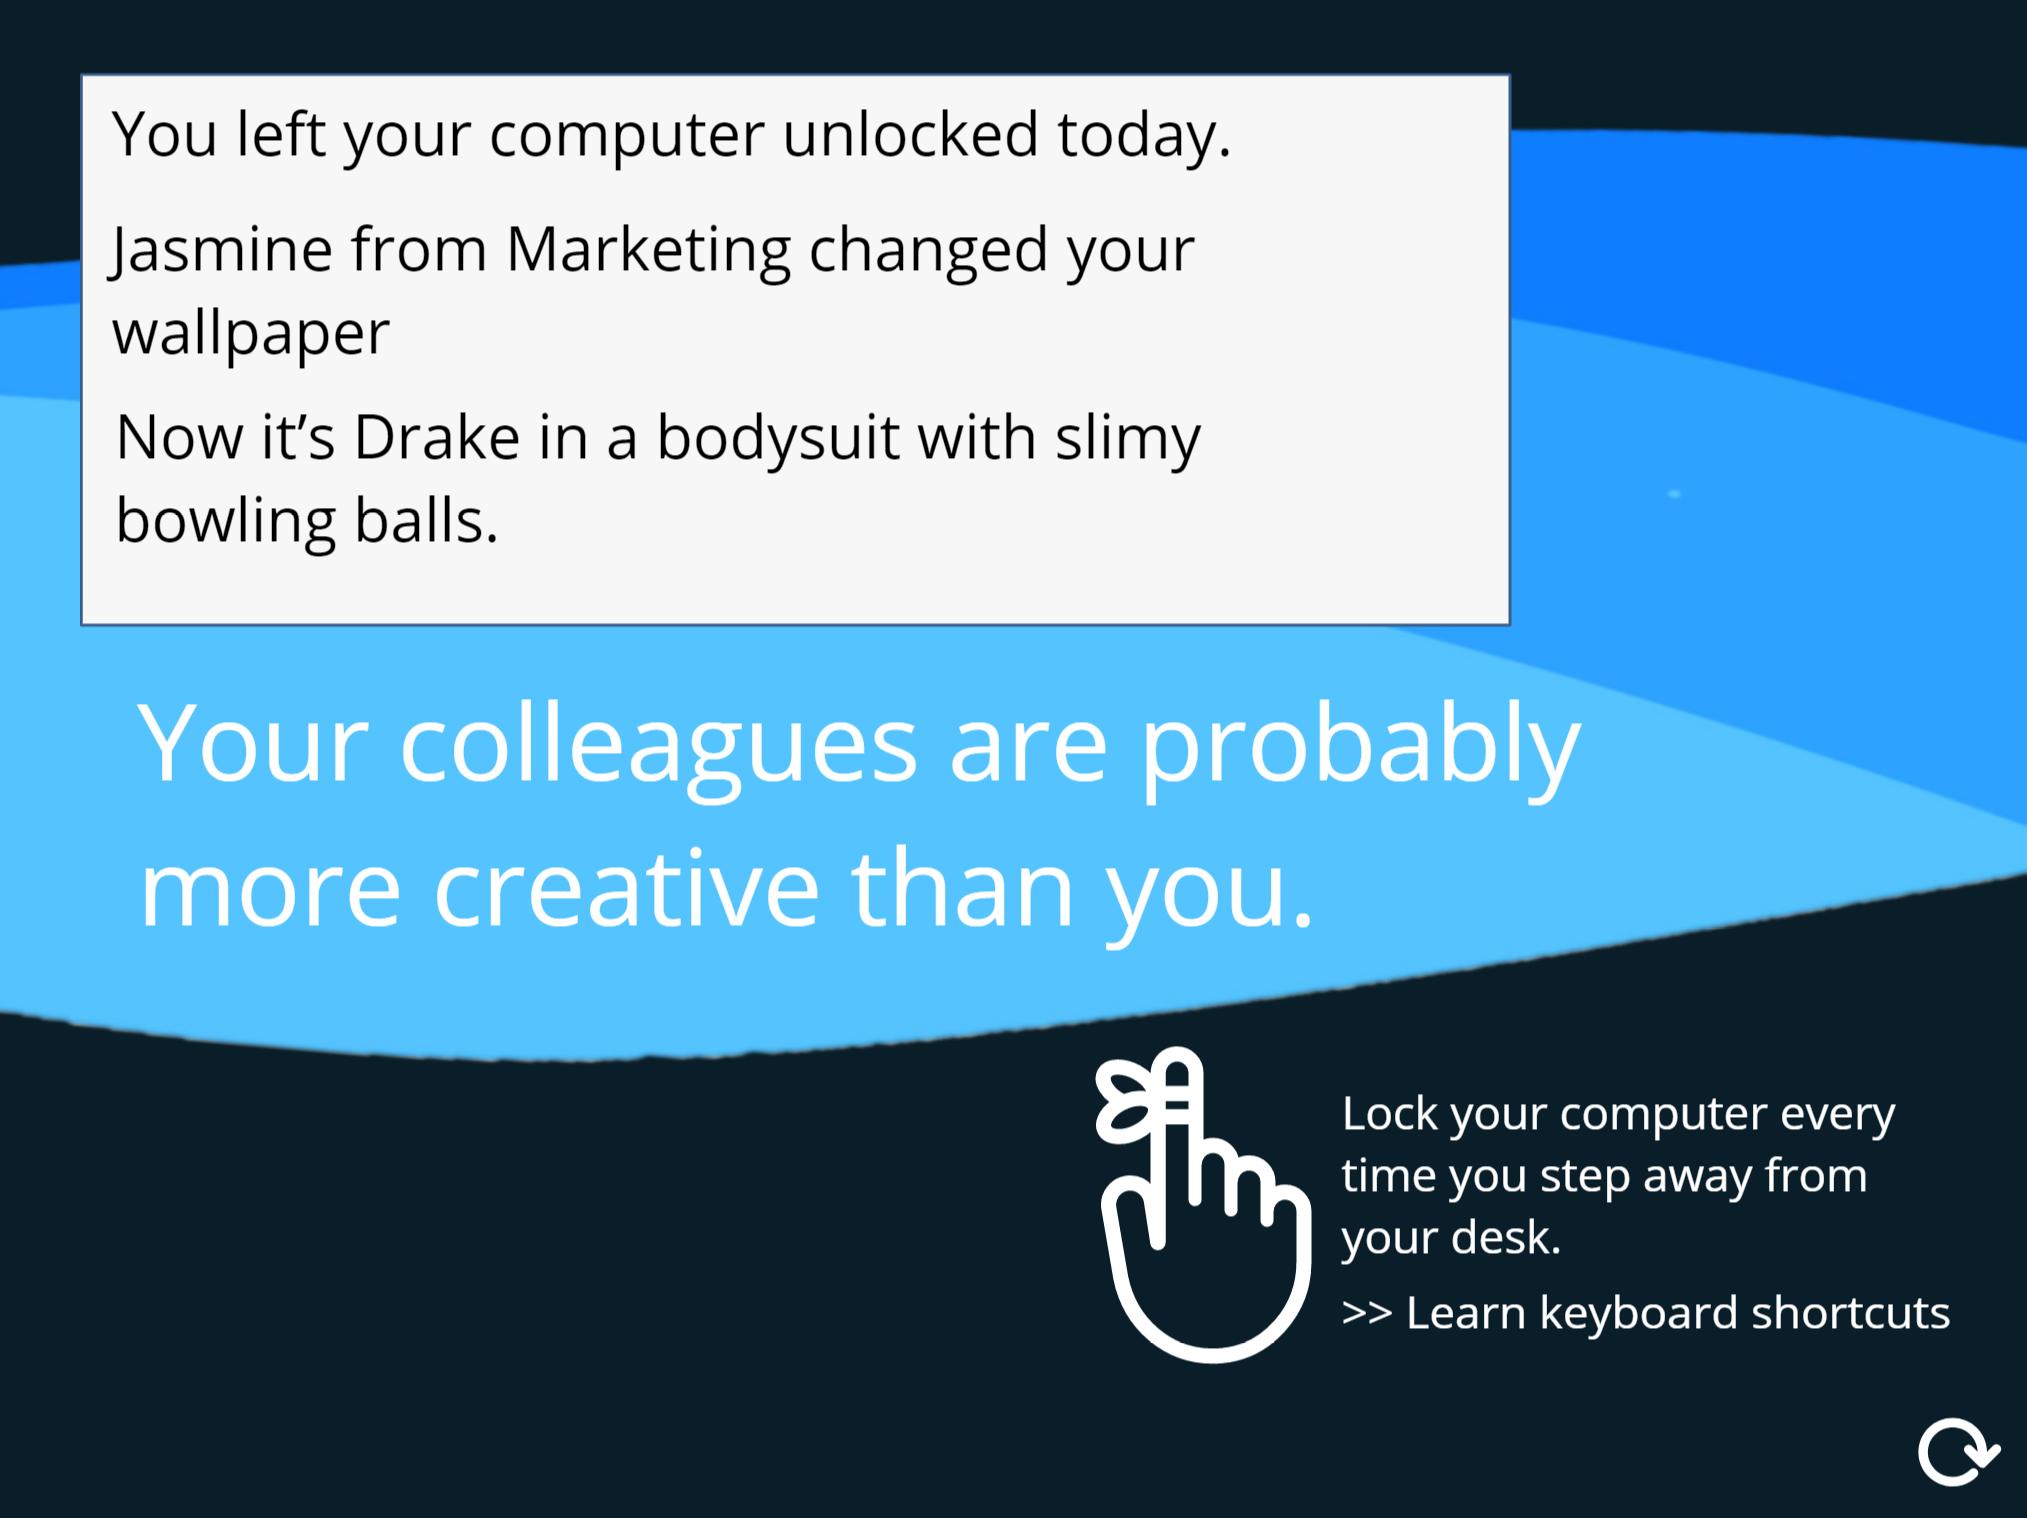 The second slide has the punch (your colleagues are probably more creative) and the reminder